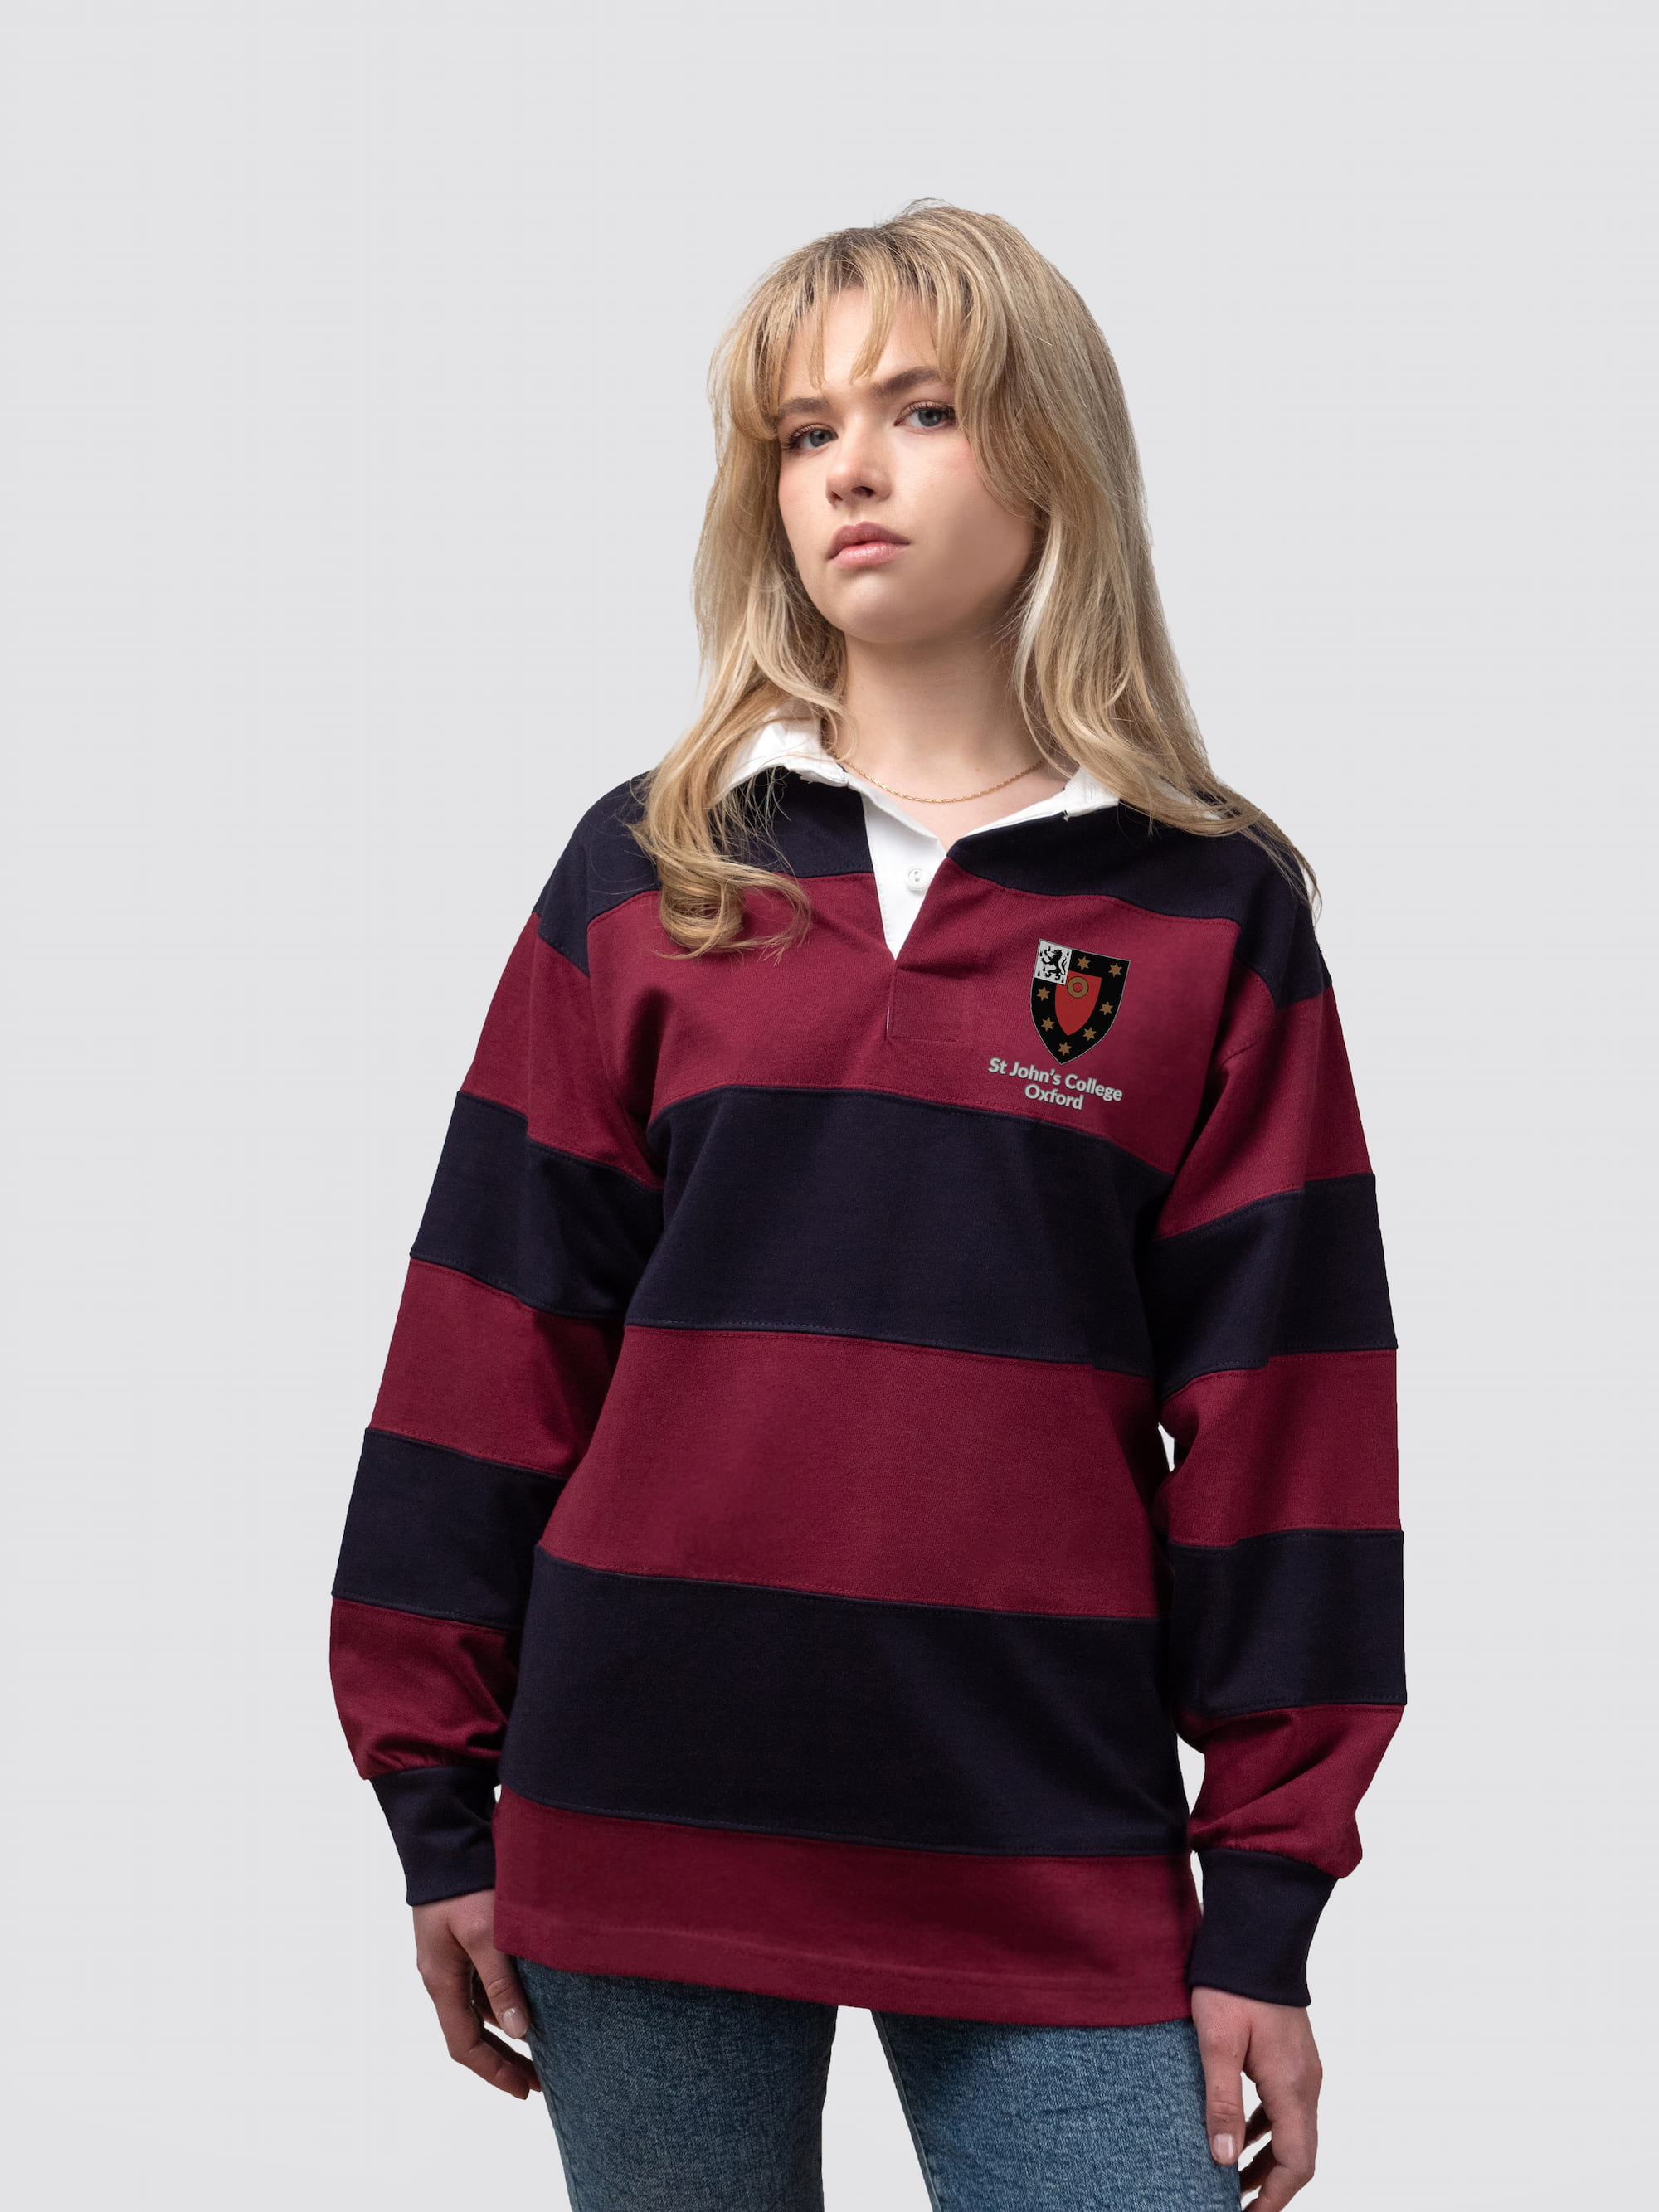 St John's College rugby shirt, with burgundy and navy stripes